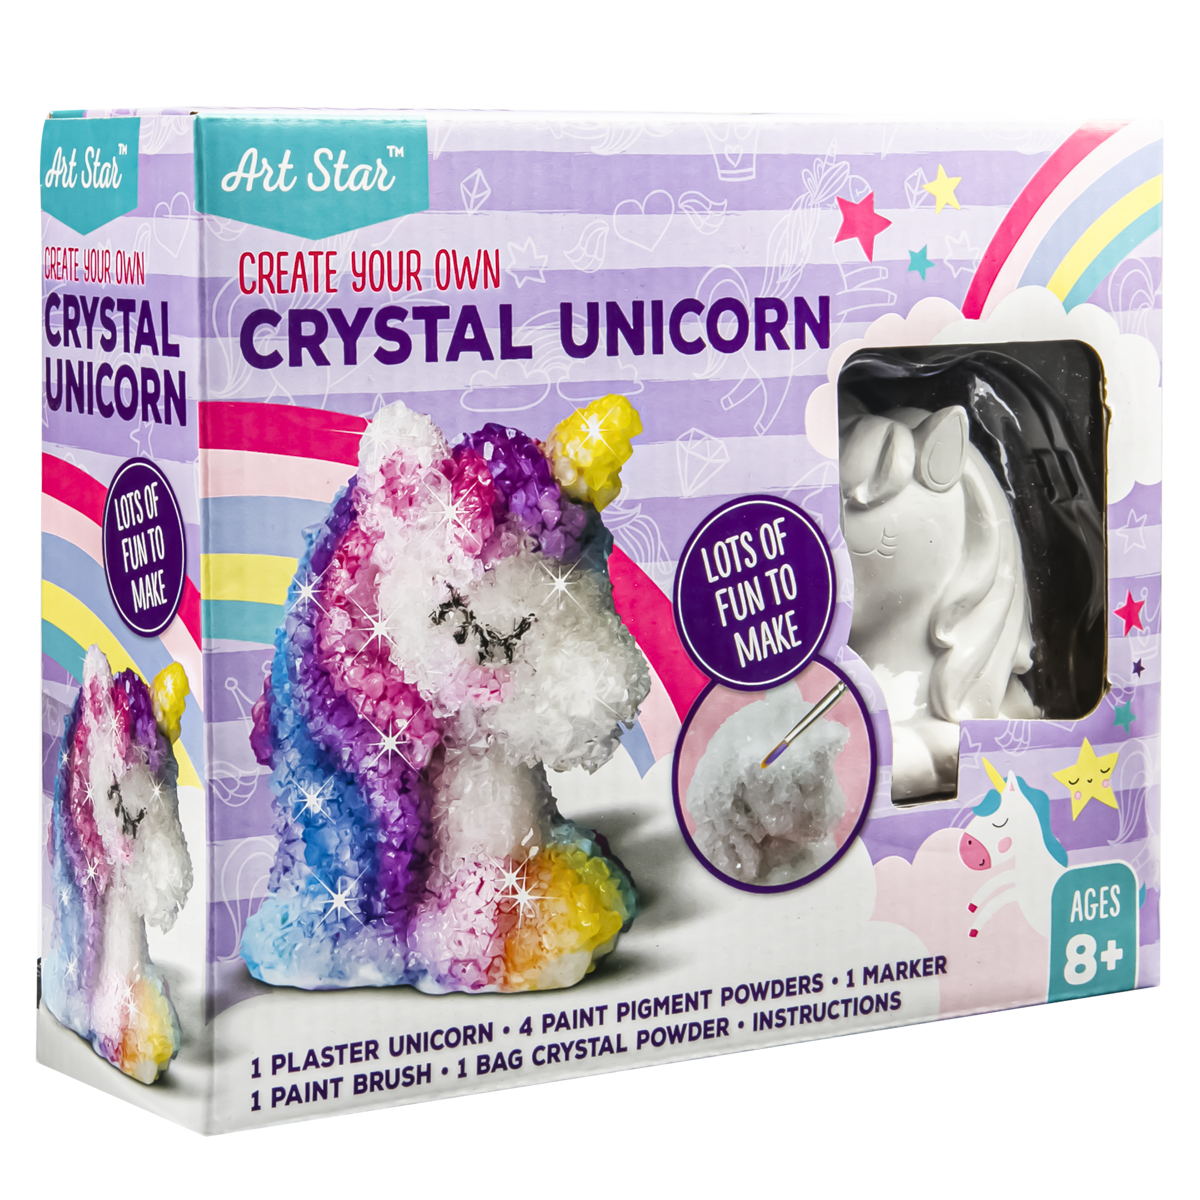 Discover a variety of Kids Craft Kits 5 For $30 Bundle Promo Riot